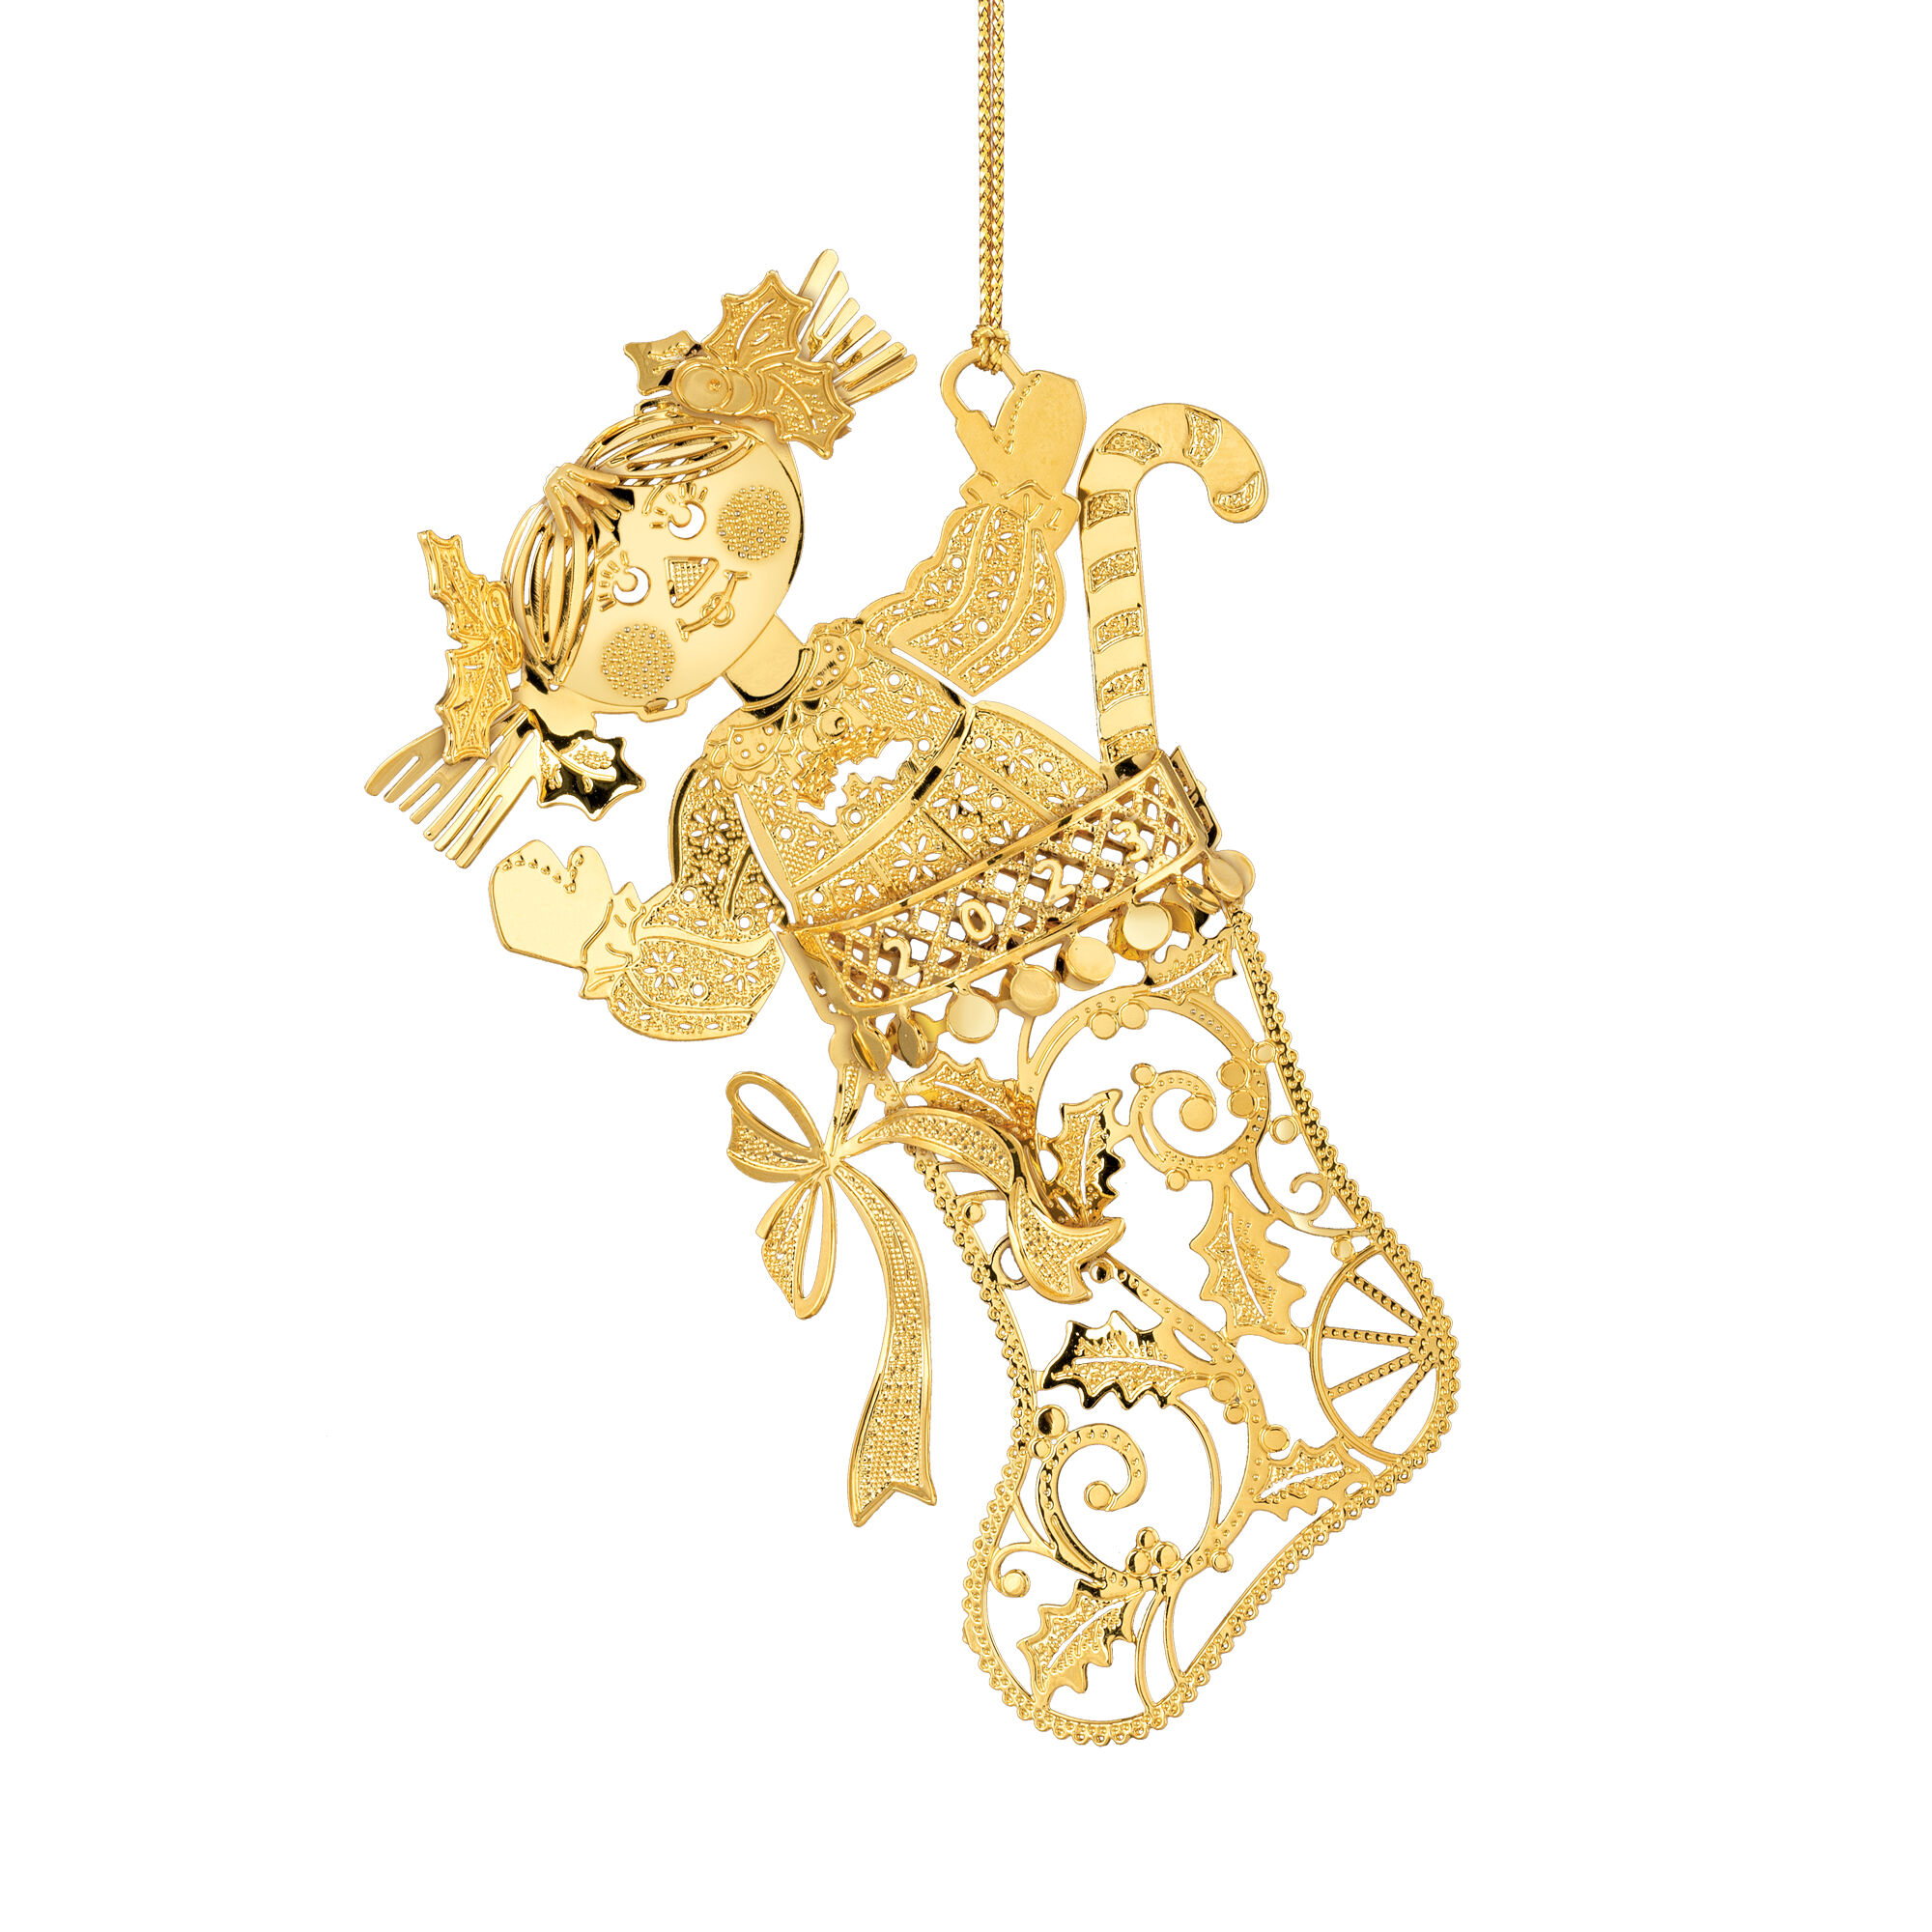 The 2023 Gold Christmas Ornament Collection 10312 0036 k stocking